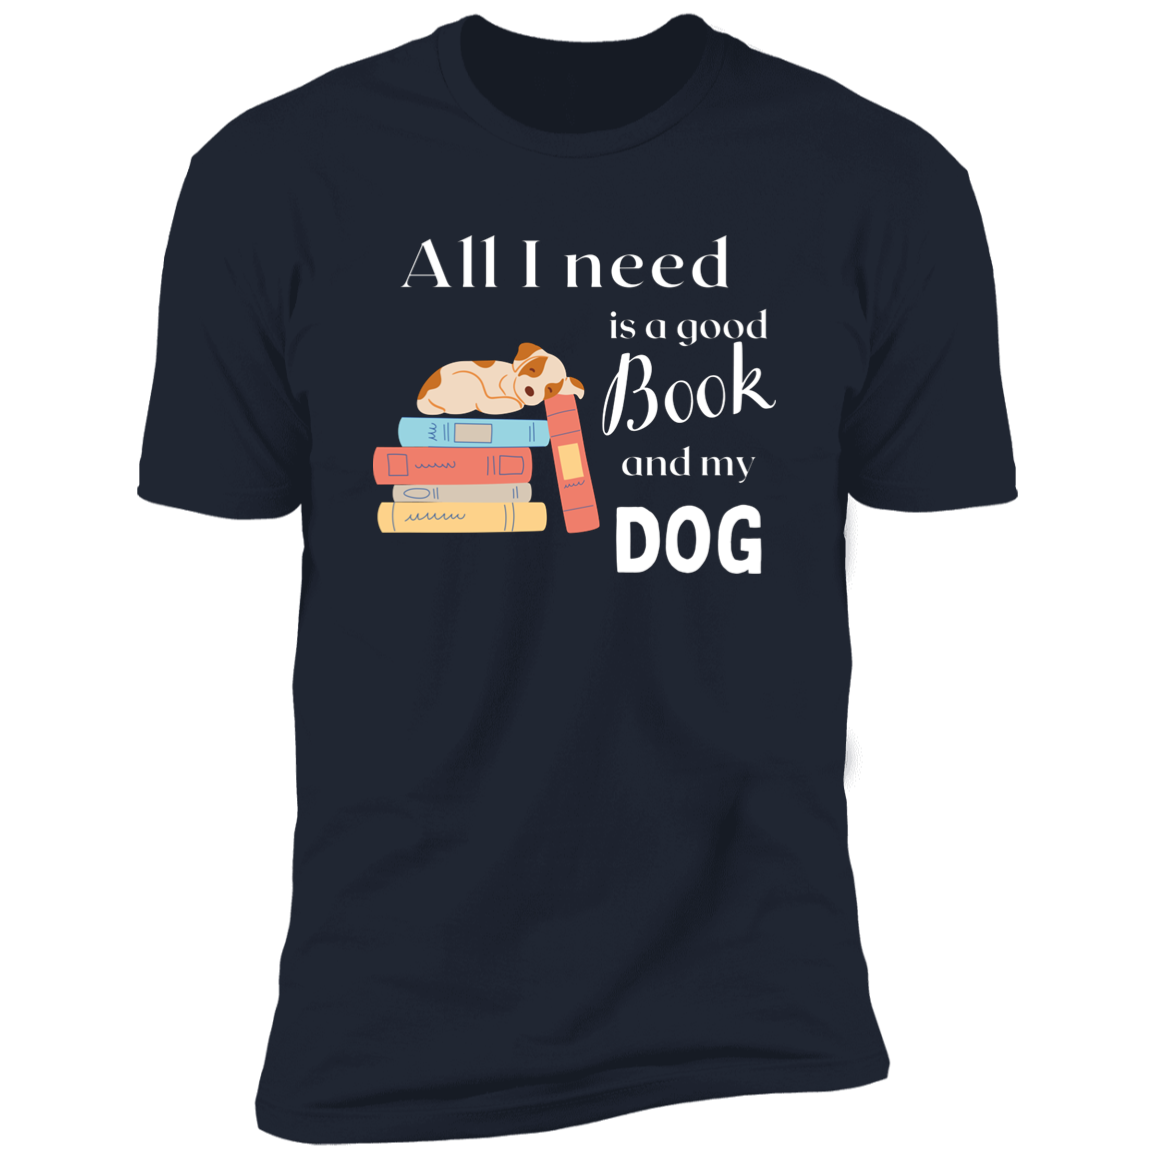 All I Need is a Good Book and My Dog, dog t-shirt for humans, in navy blue